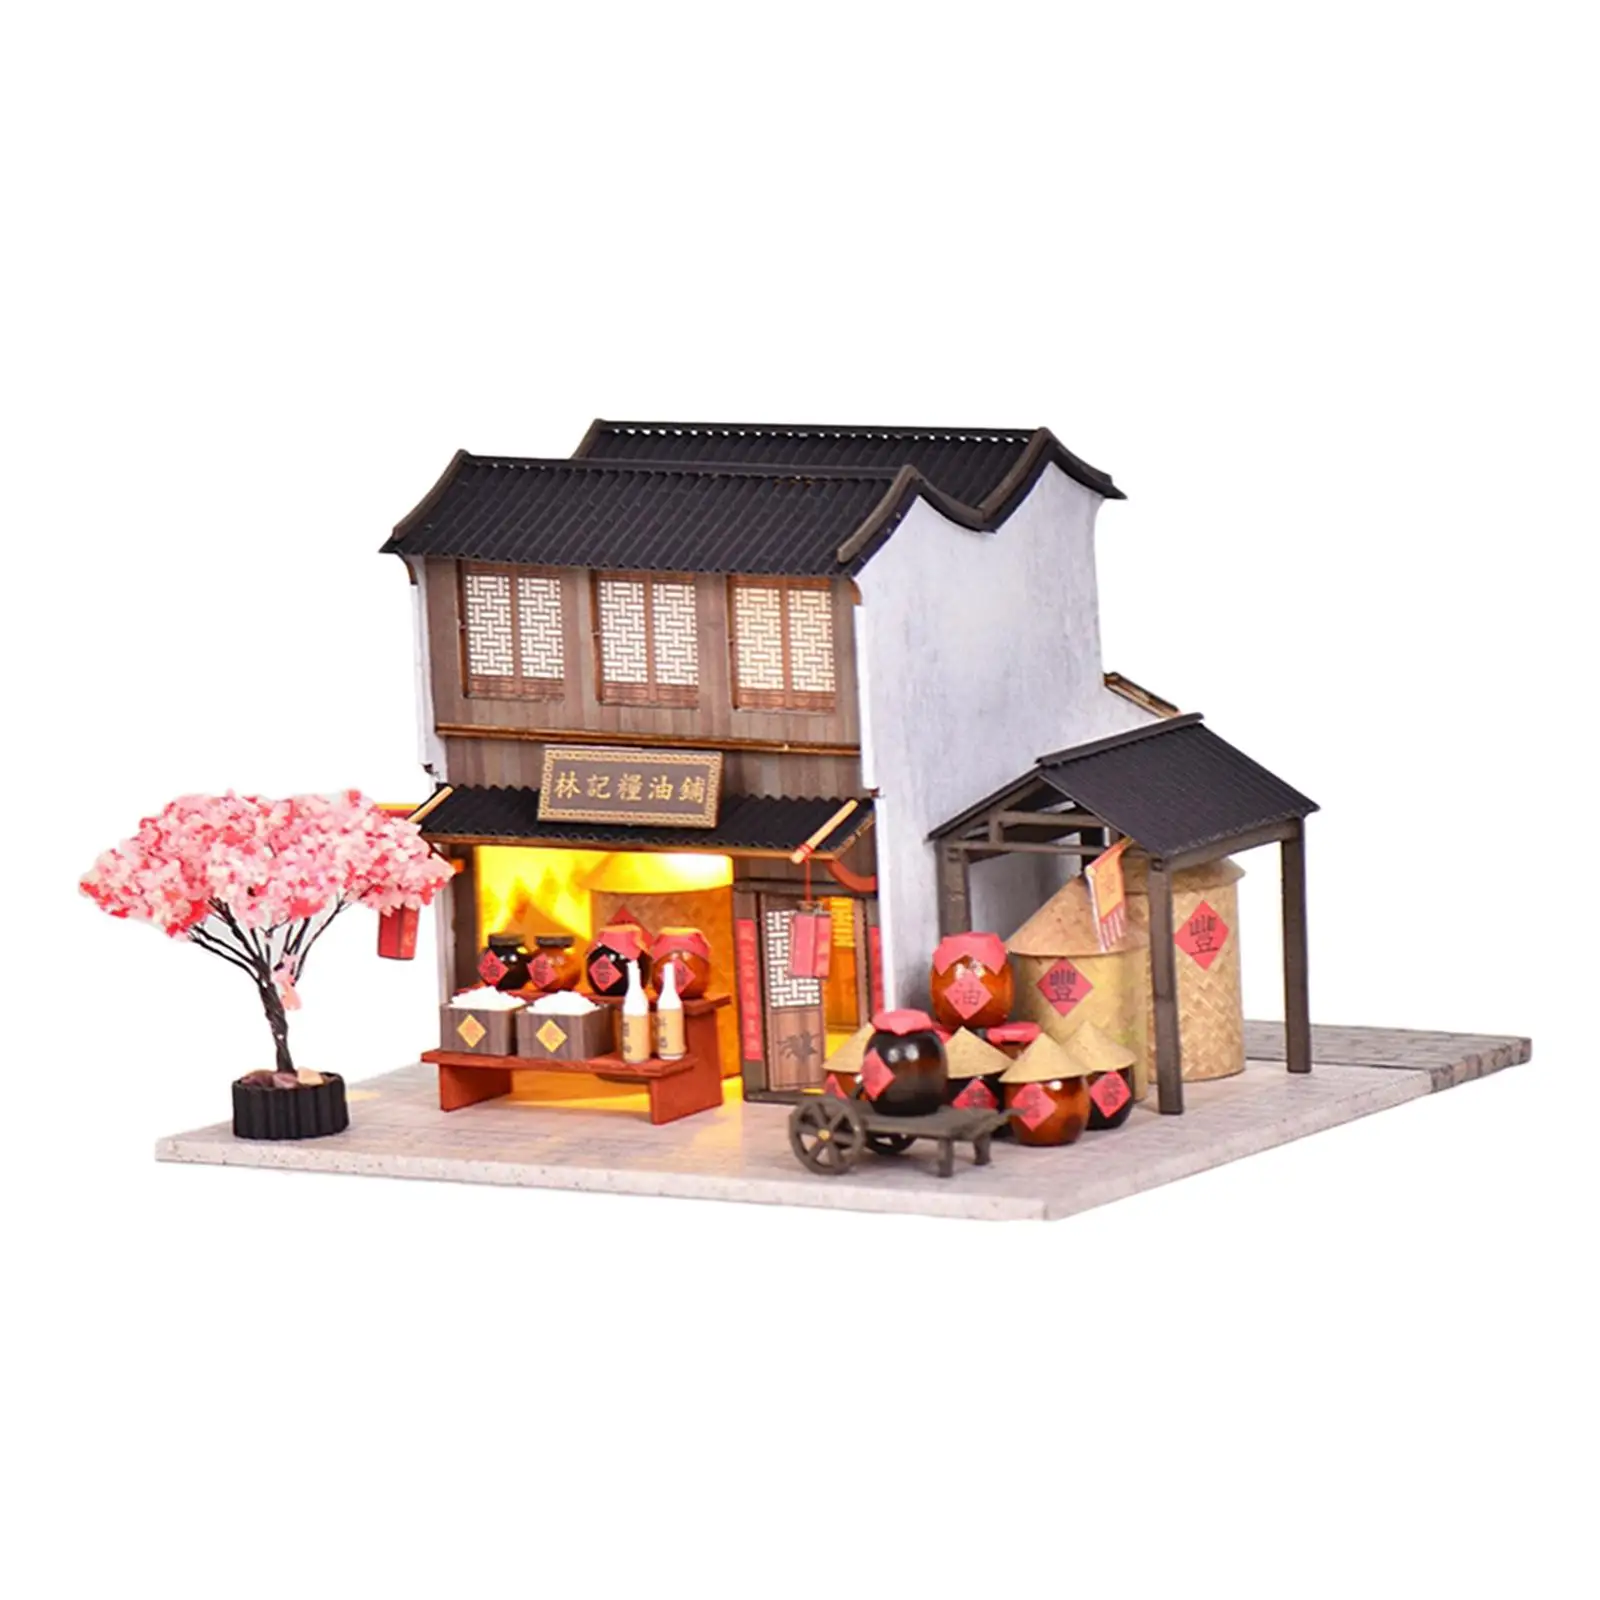 Wooden DIY Cottage Kit Accessories Chic Gift for Women Girls Boys Teens